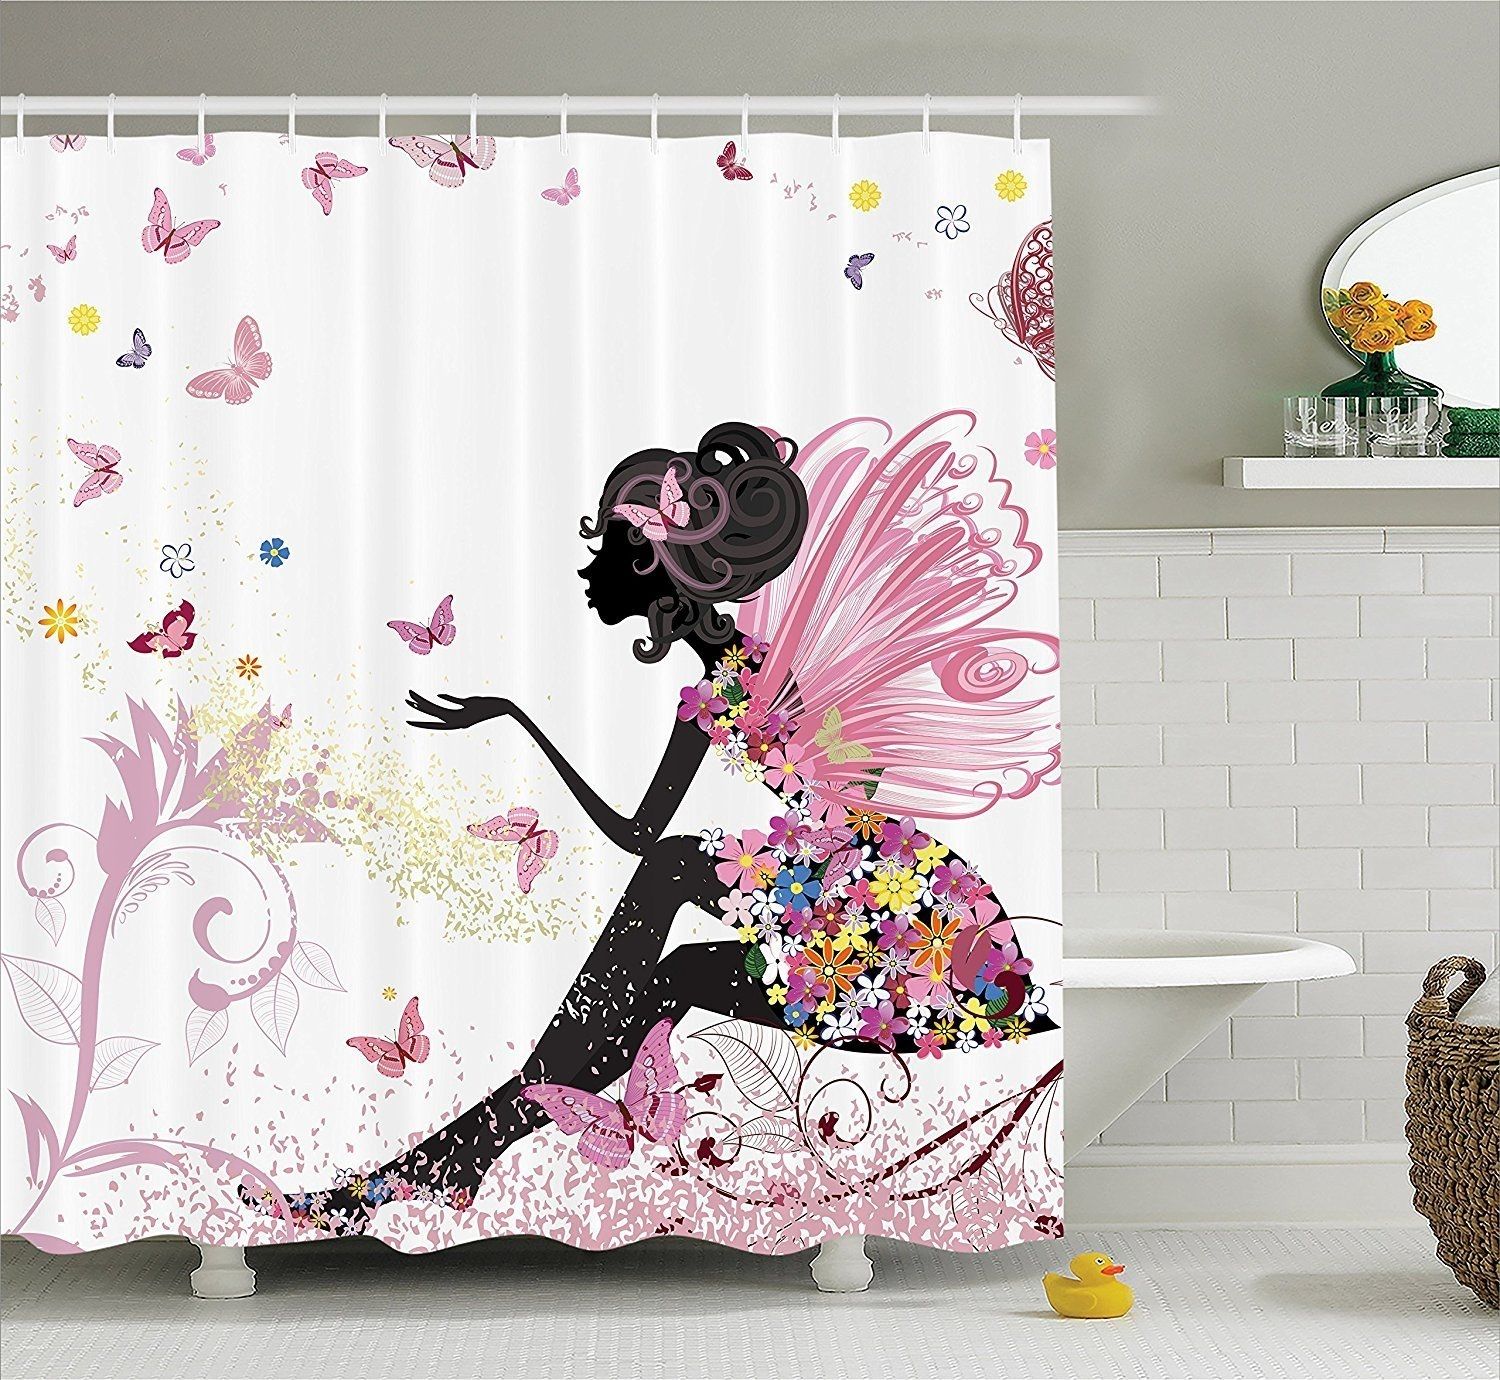 Pink Butterfly Girl With Floral Dress Flower Design Fairy Angel For Newest Fabric Dress Wall Art (View 1 of 15)